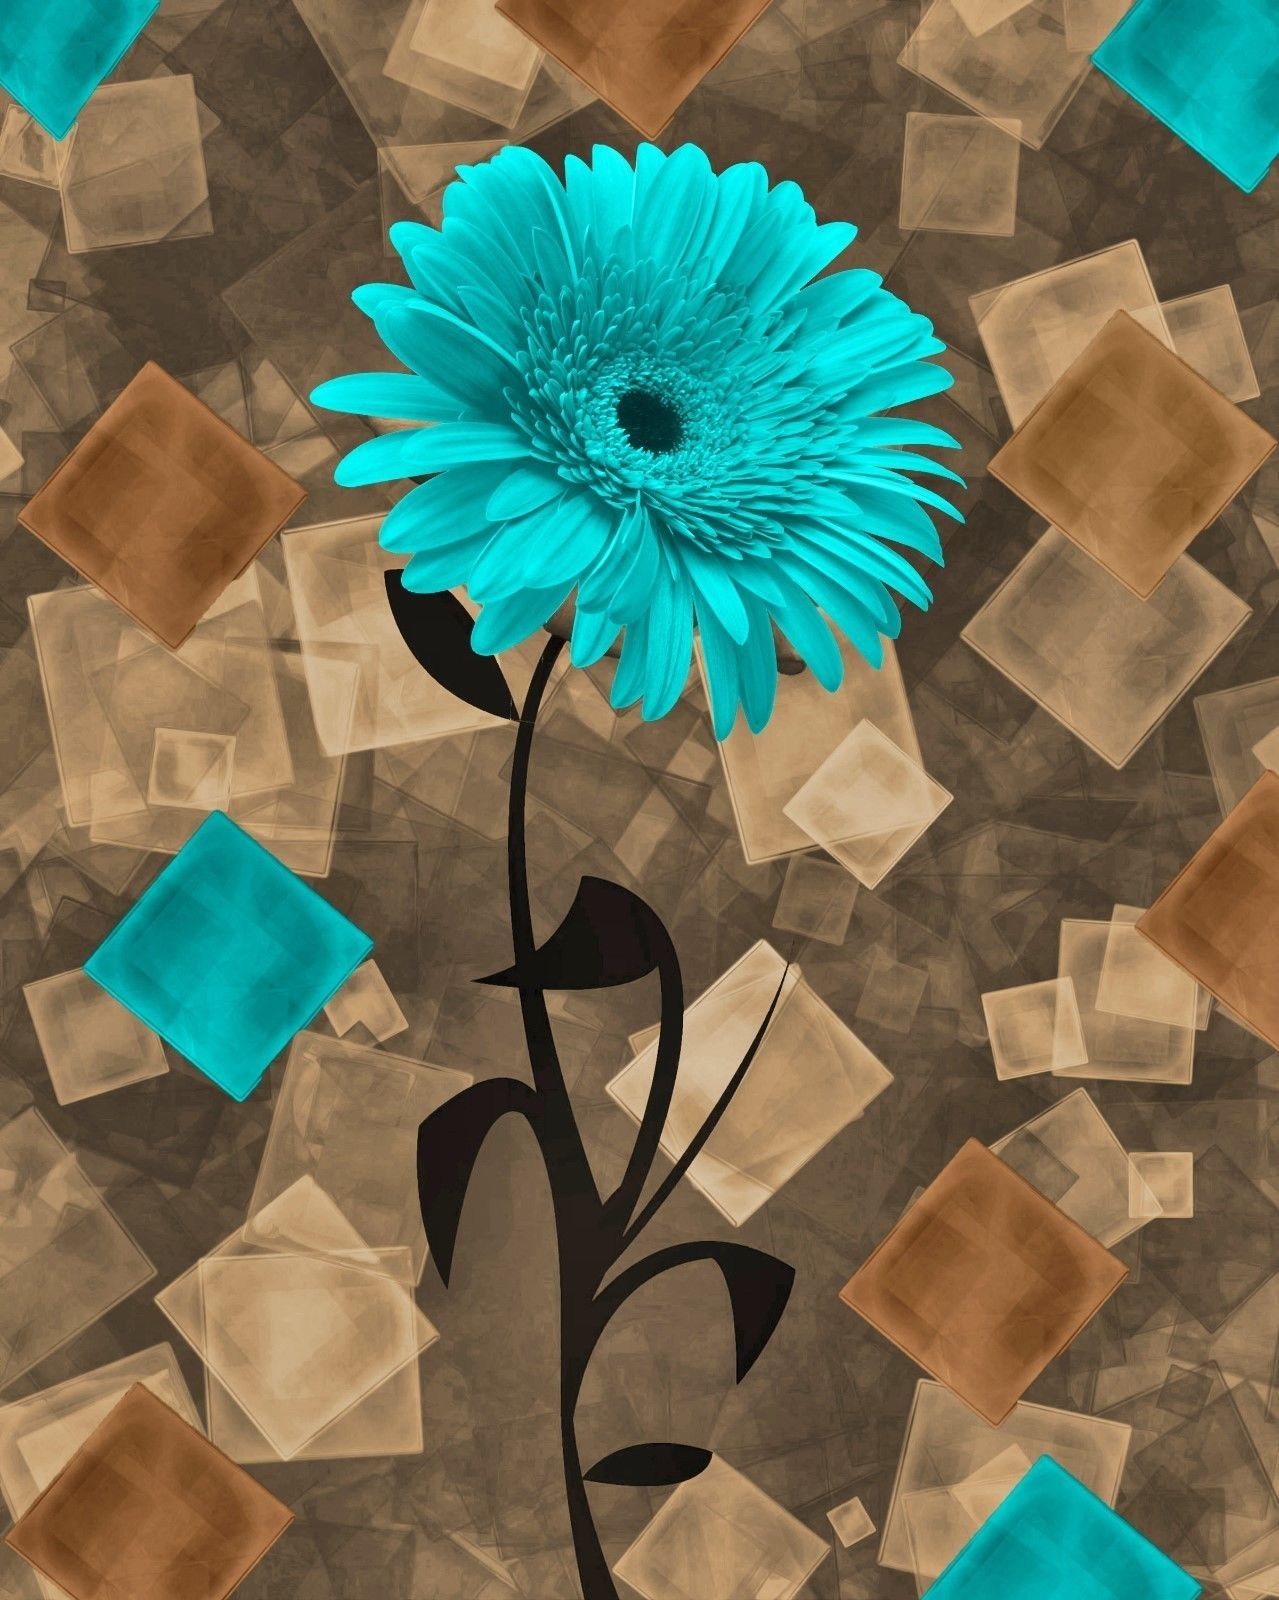 20 Best Collection of Teal and Brown Wall Art